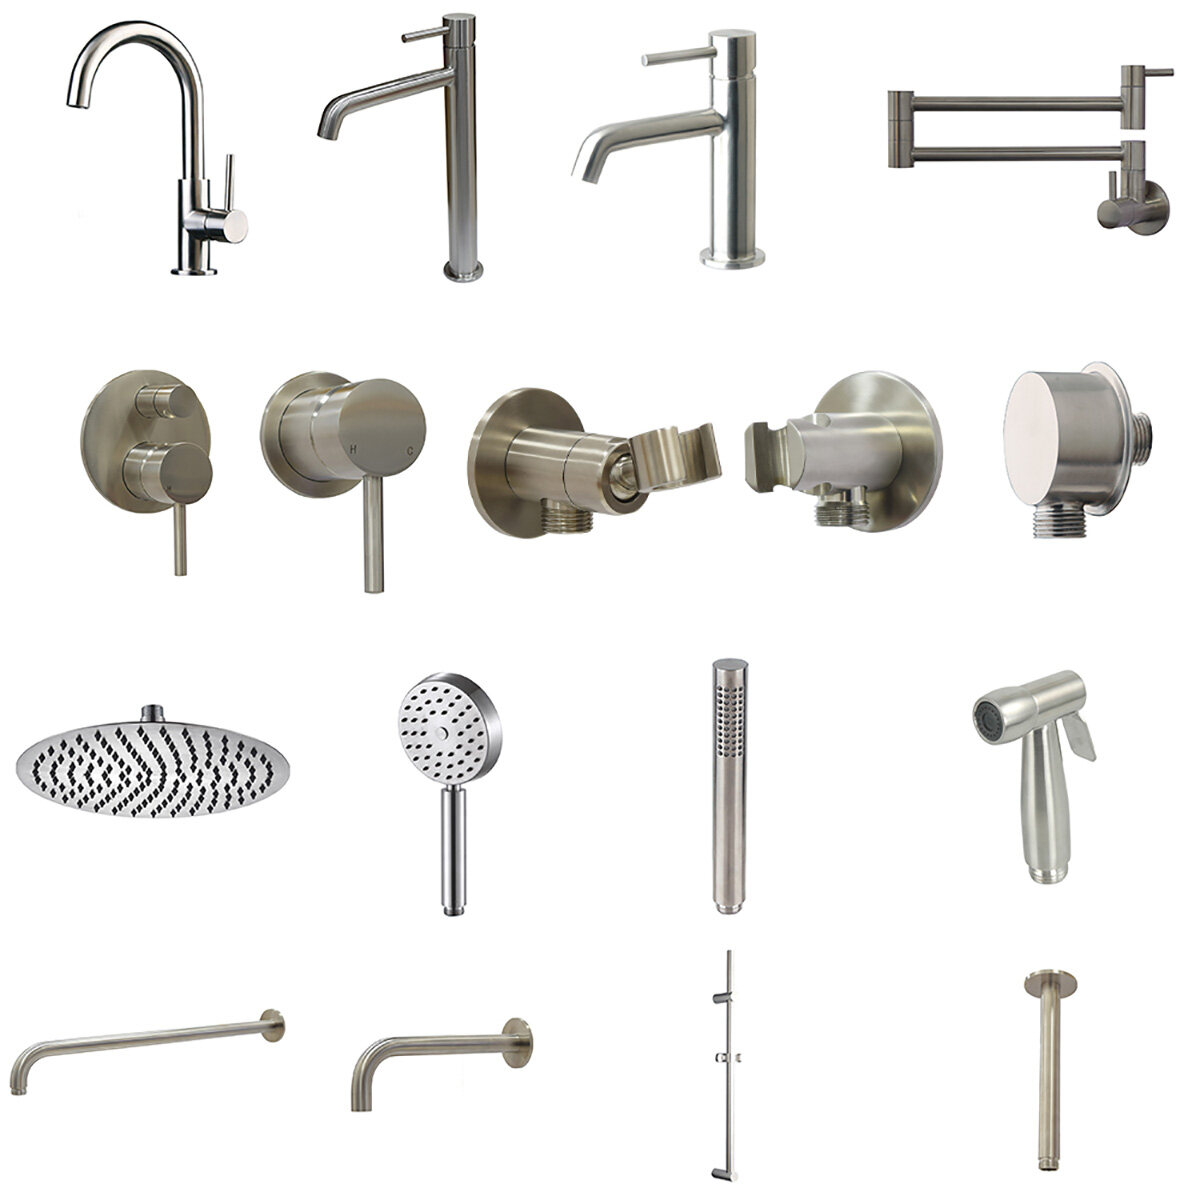 Elevating Your Bathroom Experience with a Custom Bathroom Shower Faucet